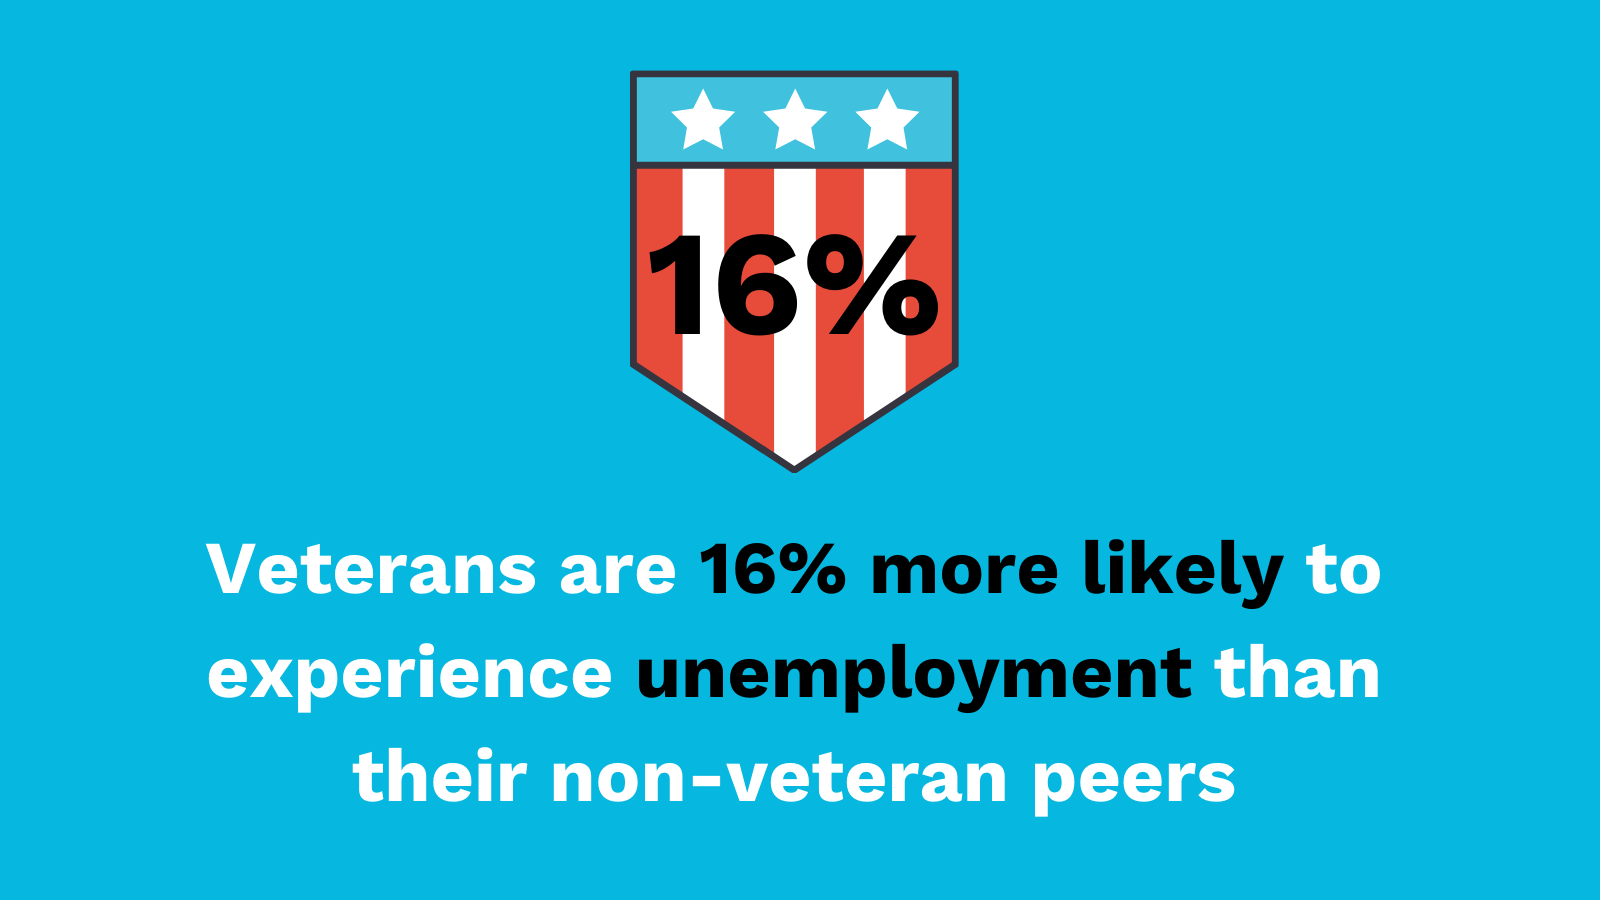 Veterans are 16% more likely to be unemployed